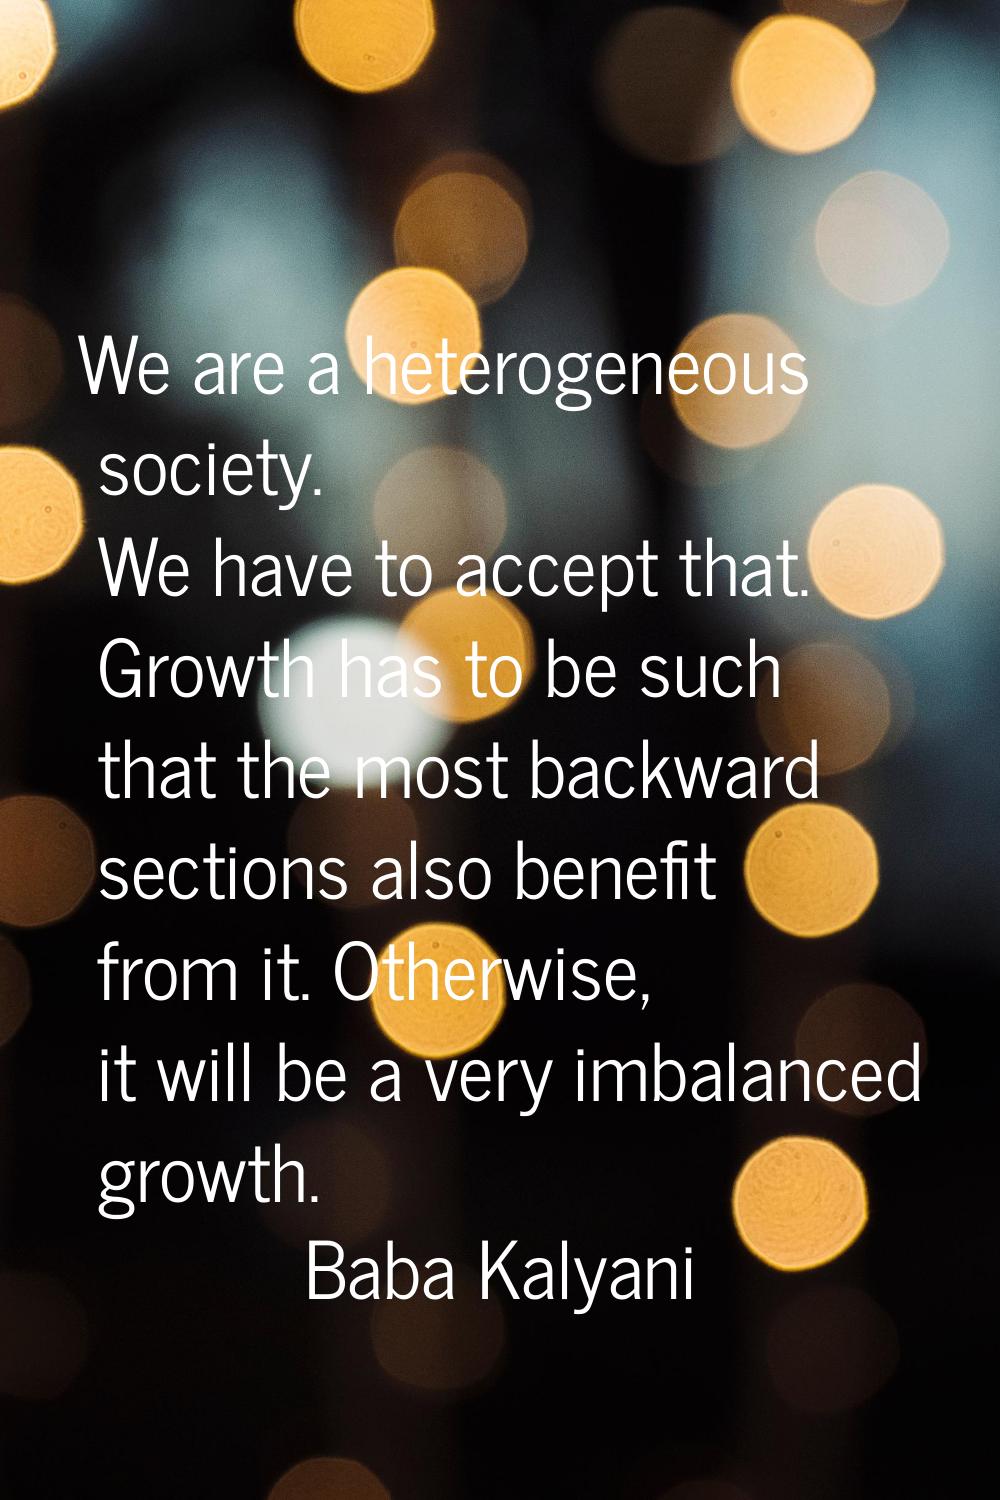 We are a heterogeneous society. We have to accept that. Growth has to be such that the most backwar